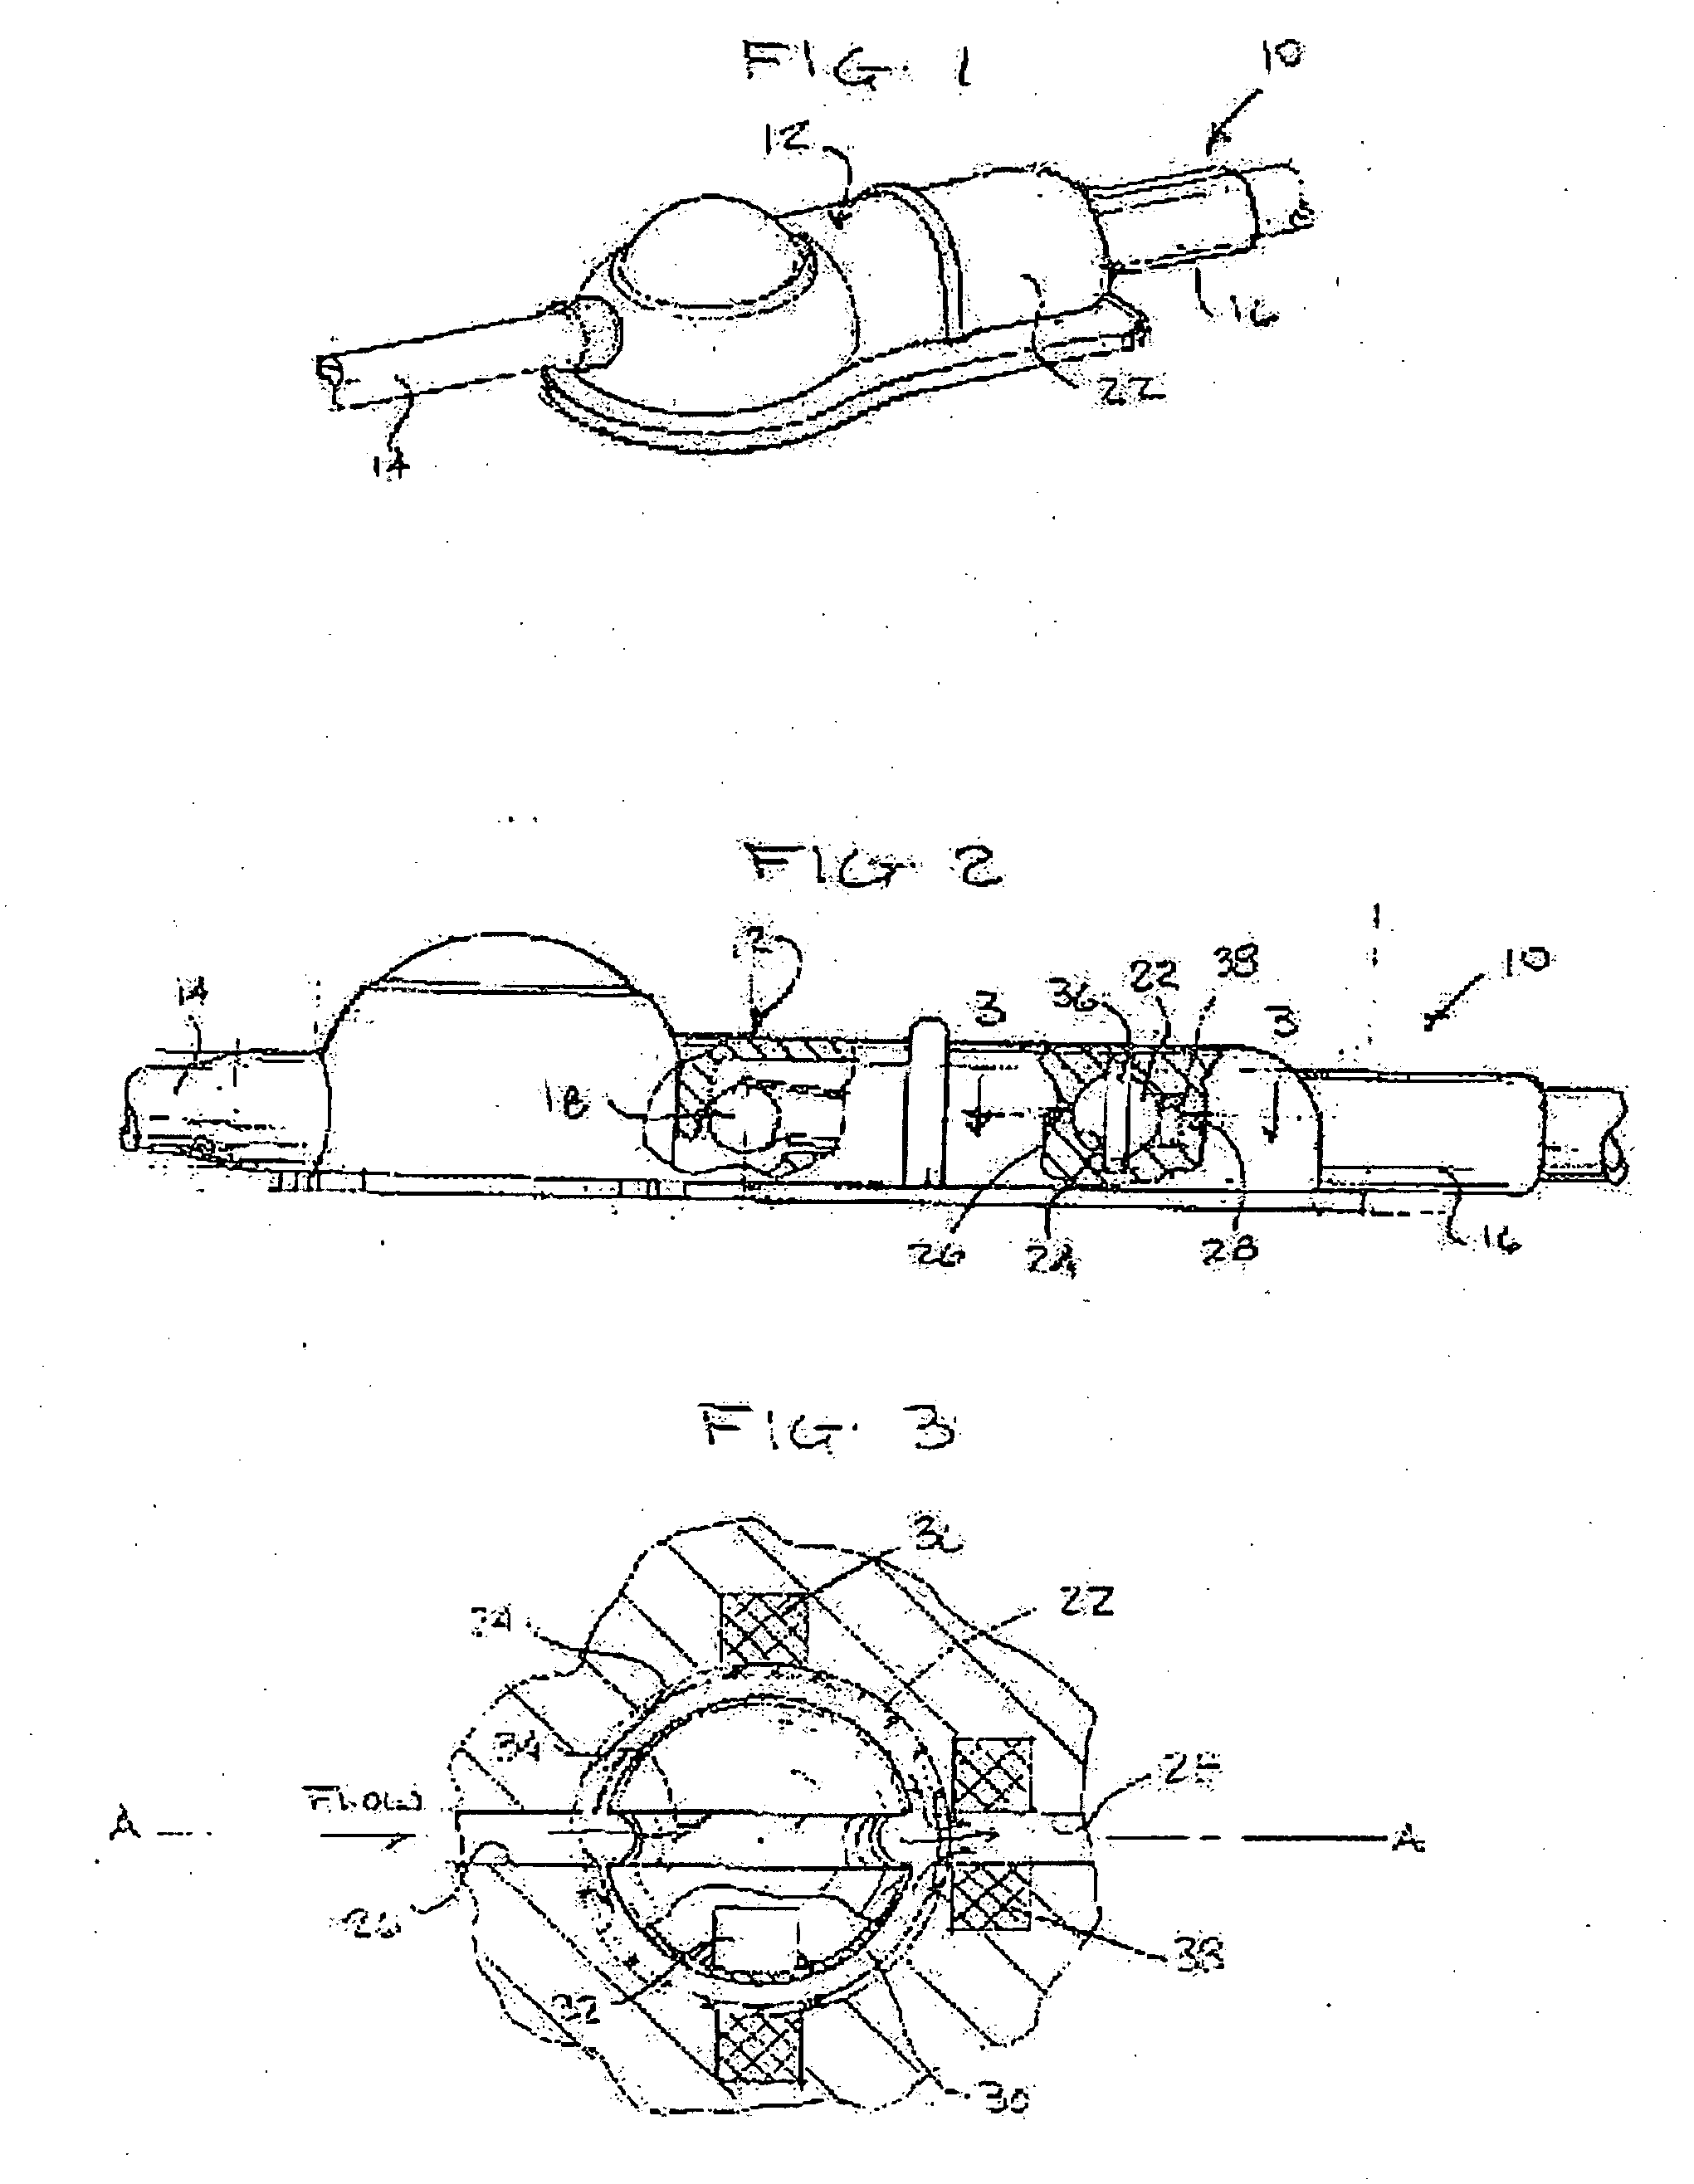 Shunt system including a flow control device for controlling the flow of cerebrospinal fluid out of a brain ventricle